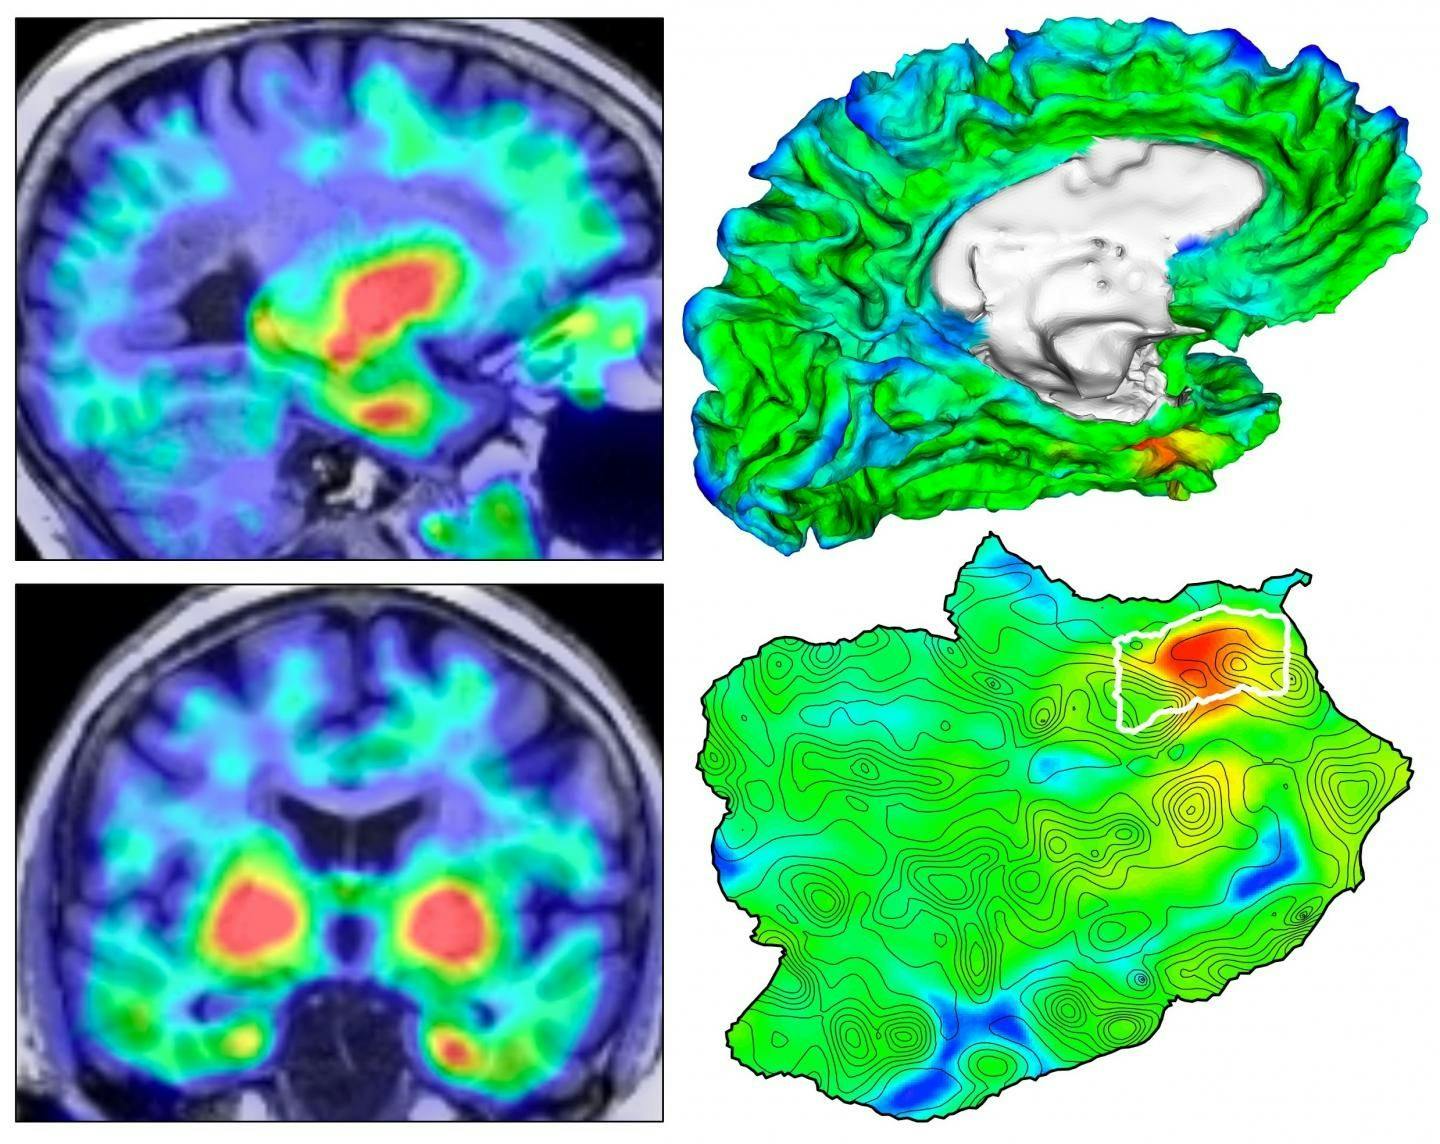 PET Imaging Reveals Site of Tau’s Emergence in Alzheimer’s